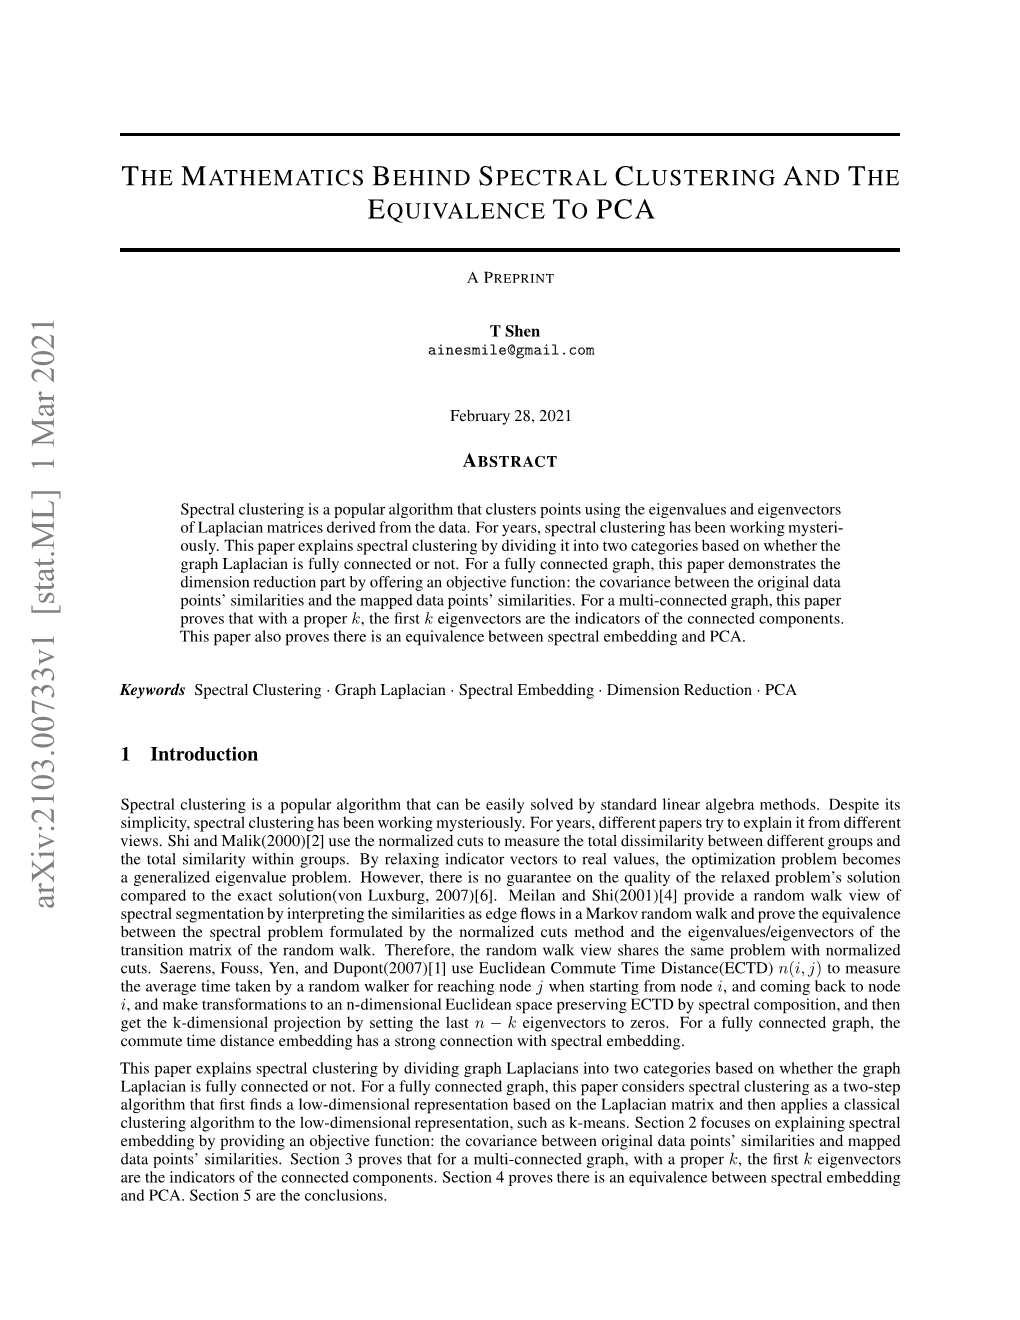 The Mathematics Behind Spectral Clustering and the Equivalence to PCA APREPRINT